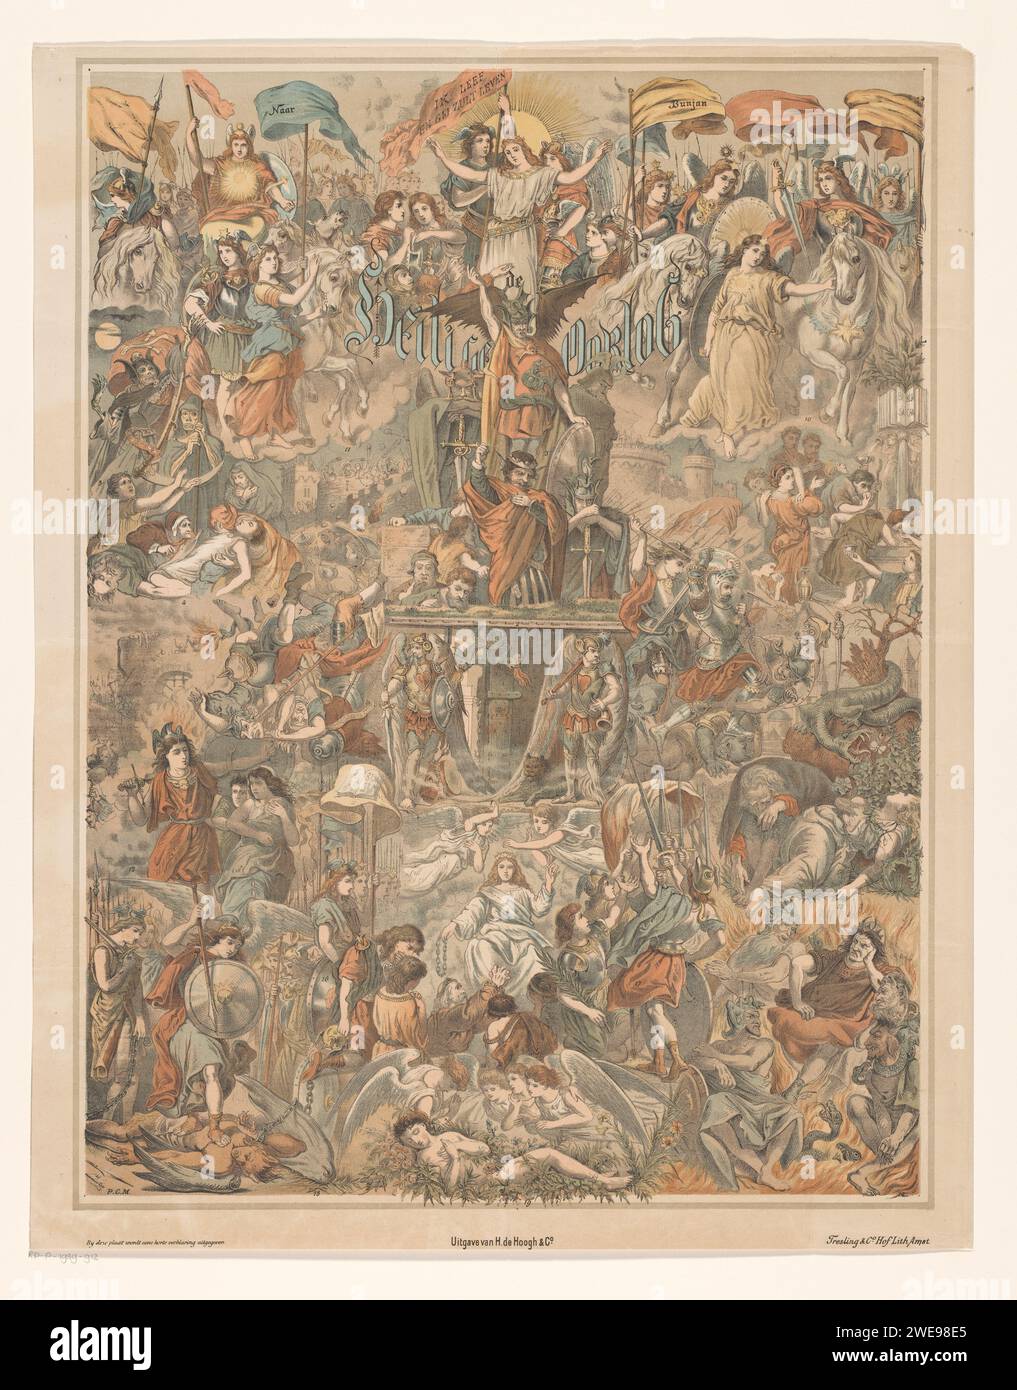 Allegory of a Holy War, Pieter Cornelis Mondriaan (Sr.), 1885 print An allegorical representation of the story The Holy War, led by King El-Shaddai against Diabolus by John Bunyan from 1682. In the middle of a sleeping woman is covered in roses, angels admire and guard her. She symbolizes the city of Menenziel as it was in principle created by King El-Shaddai (God). Above the sleeping woman is the crowned son of the king, Immanuel (Christ). At the top left and in the middle of the top it is shown again. Immanuel was sent to the city by his father to recapture the seducer and occupier Diabolus Stock Photo